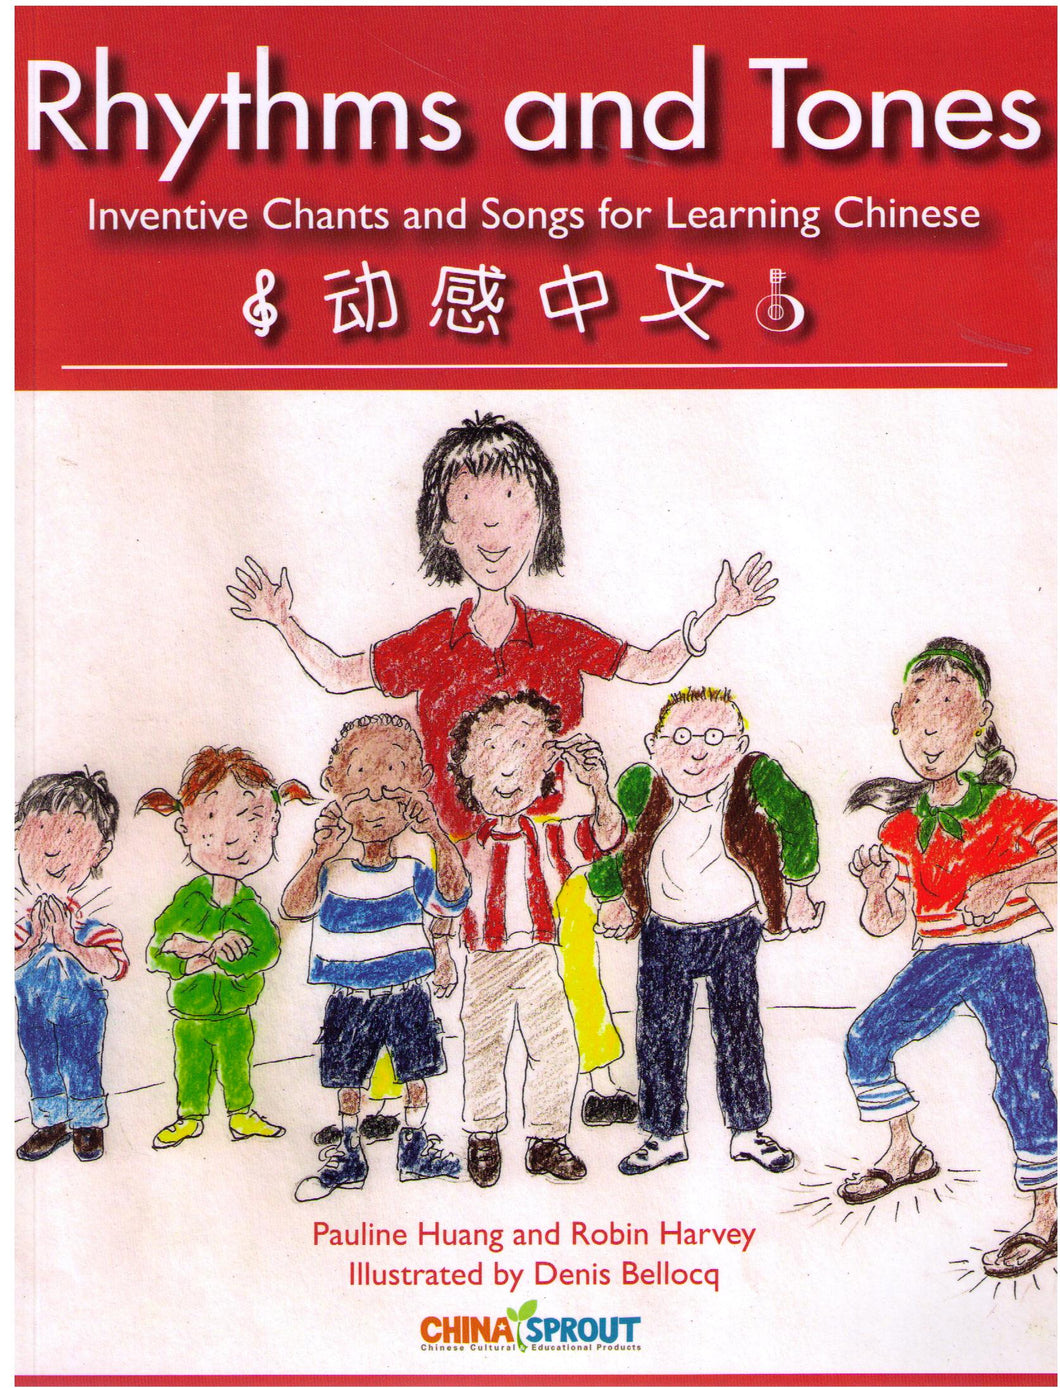 Rhythms and Tones-Chants and songs for Learning Chinese 動感中文